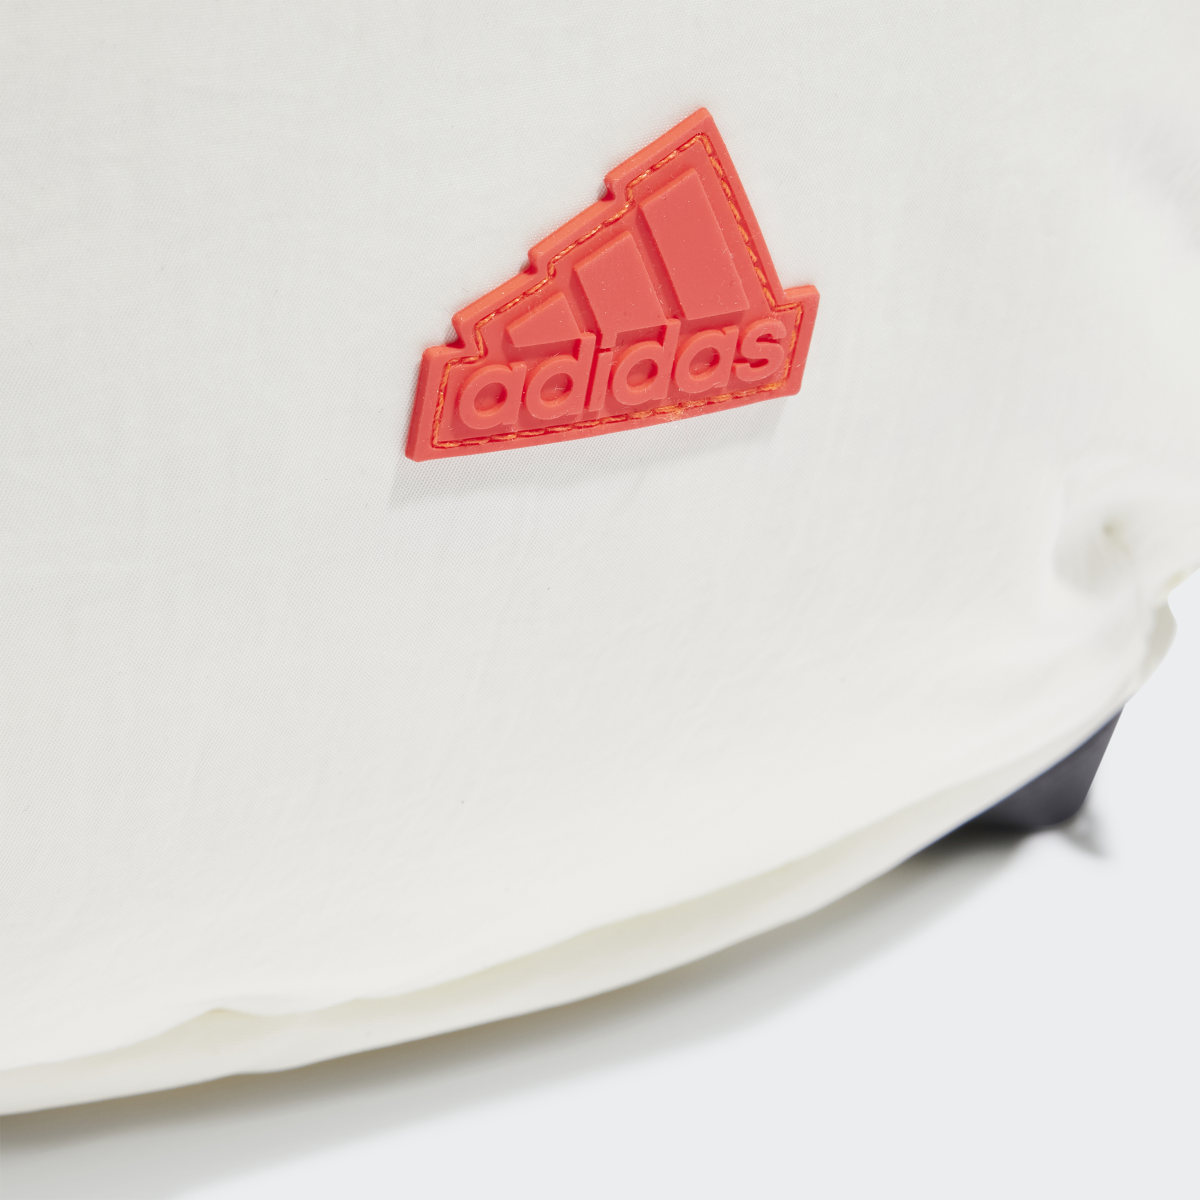 Adidas Classic Backpack. 6